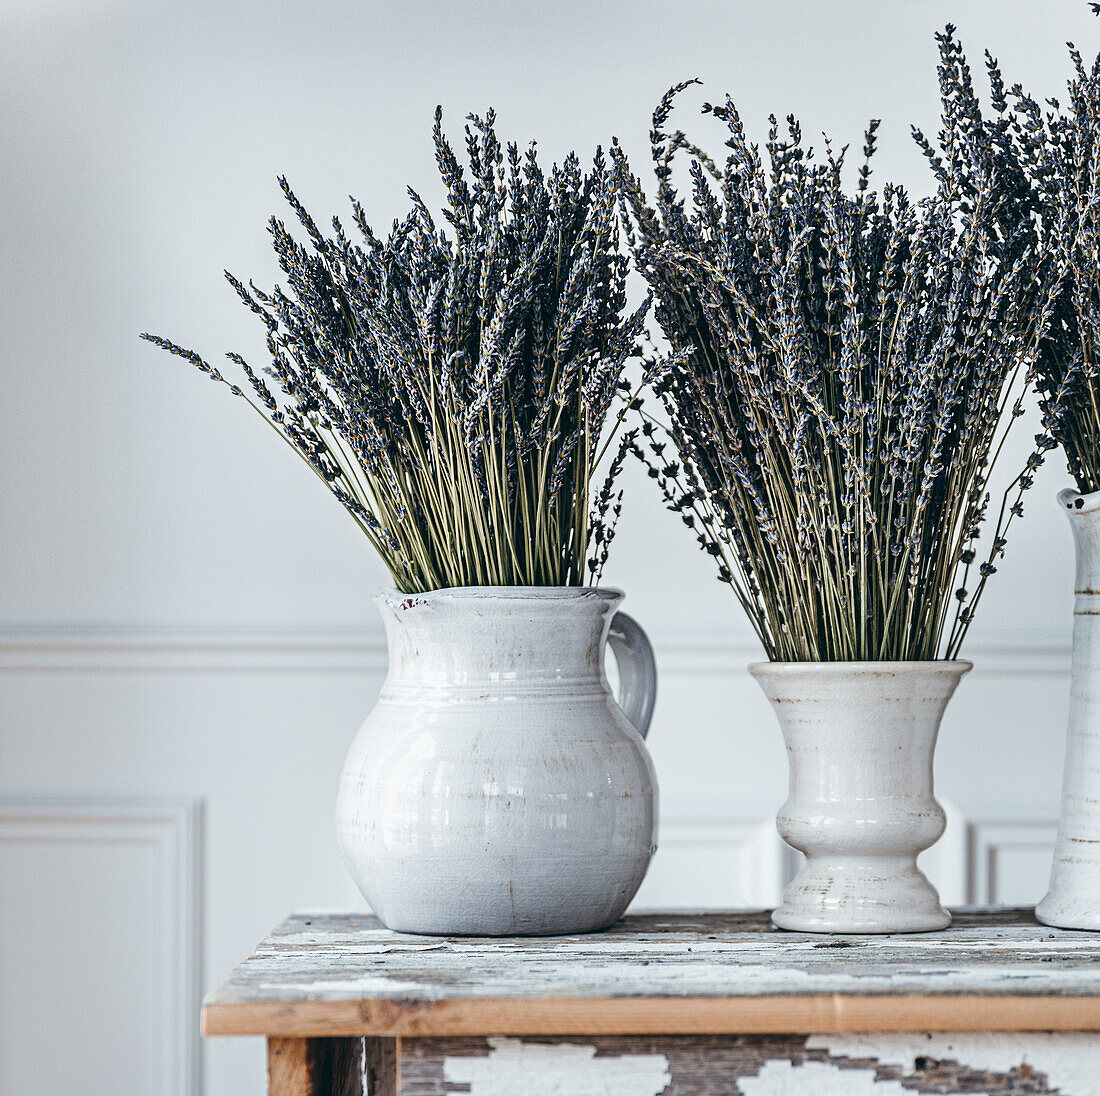 White ceramic vases with branches of blooming lavender flowers placed on wooden table against light wall